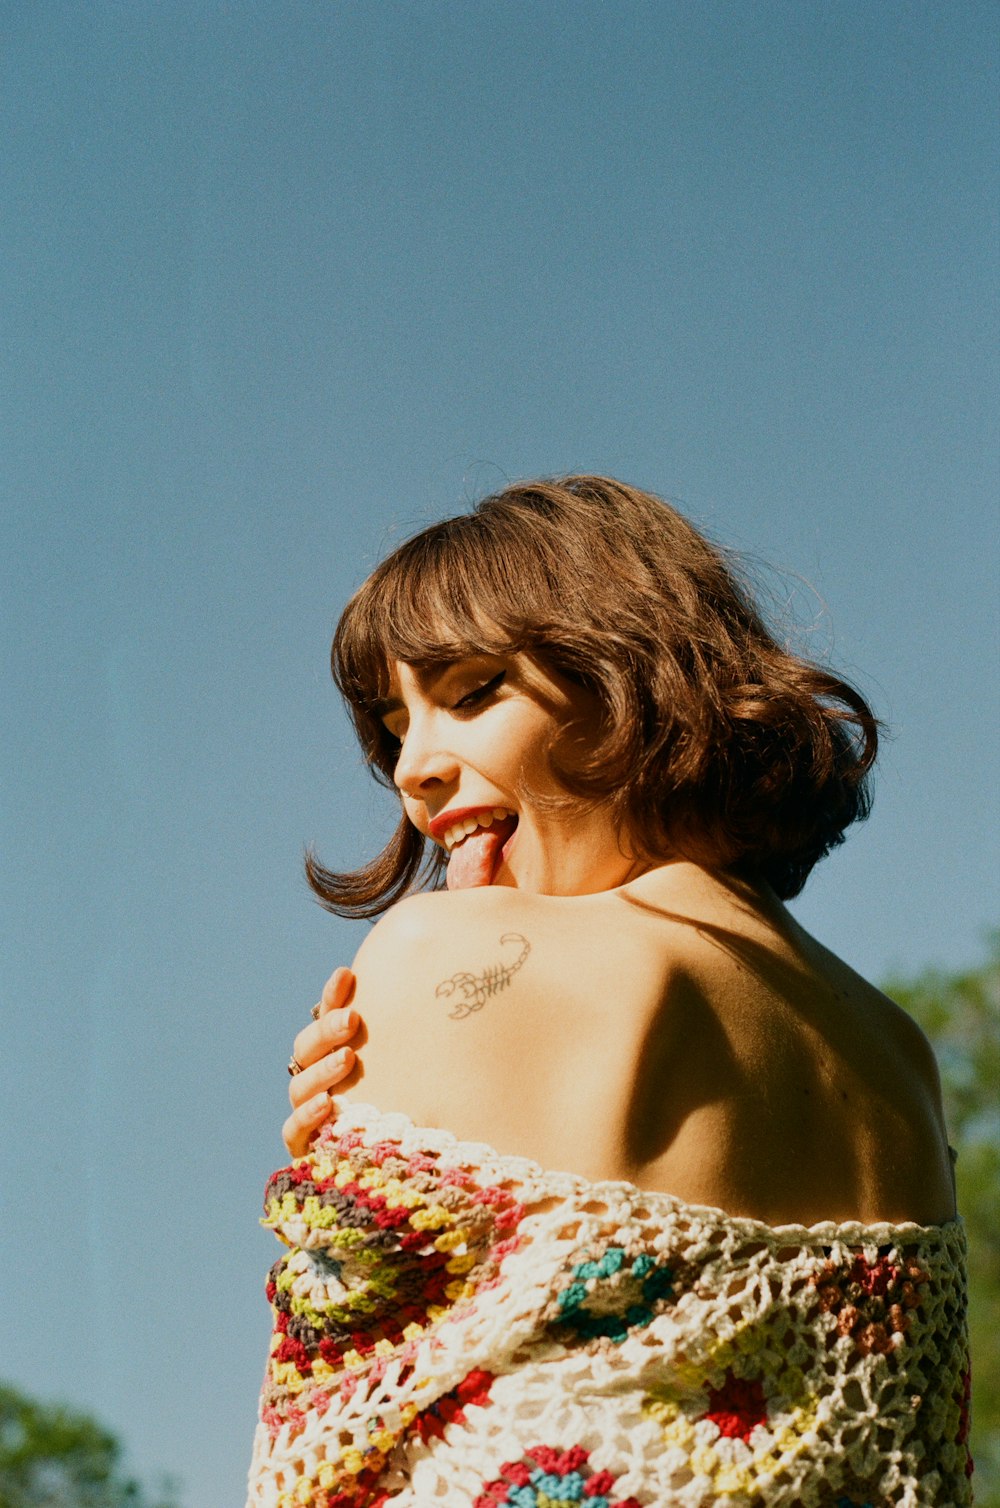 a woman in a crocheted top smiles at the camera